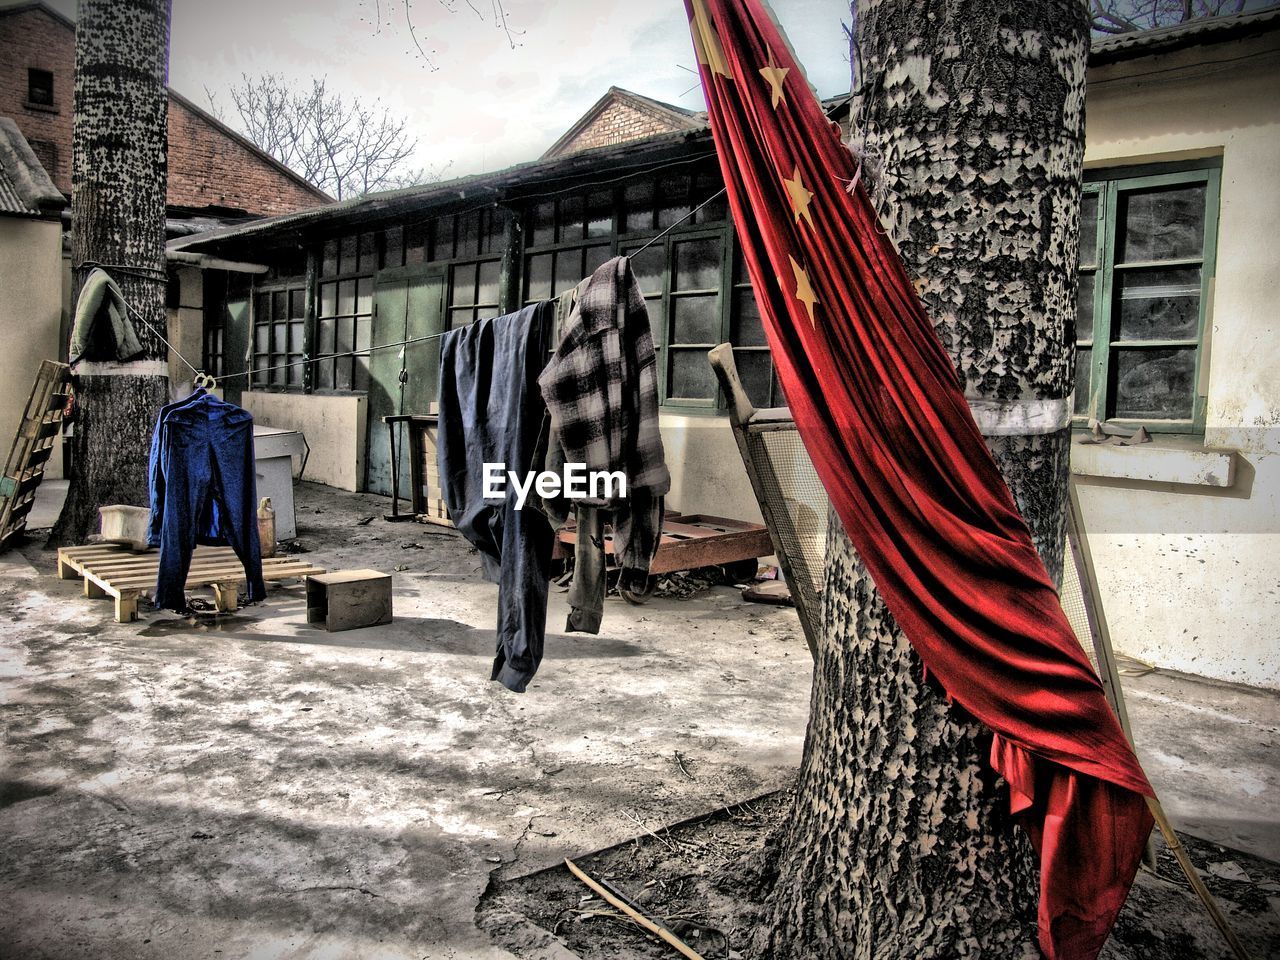 Clothes drying on clothesline outside house